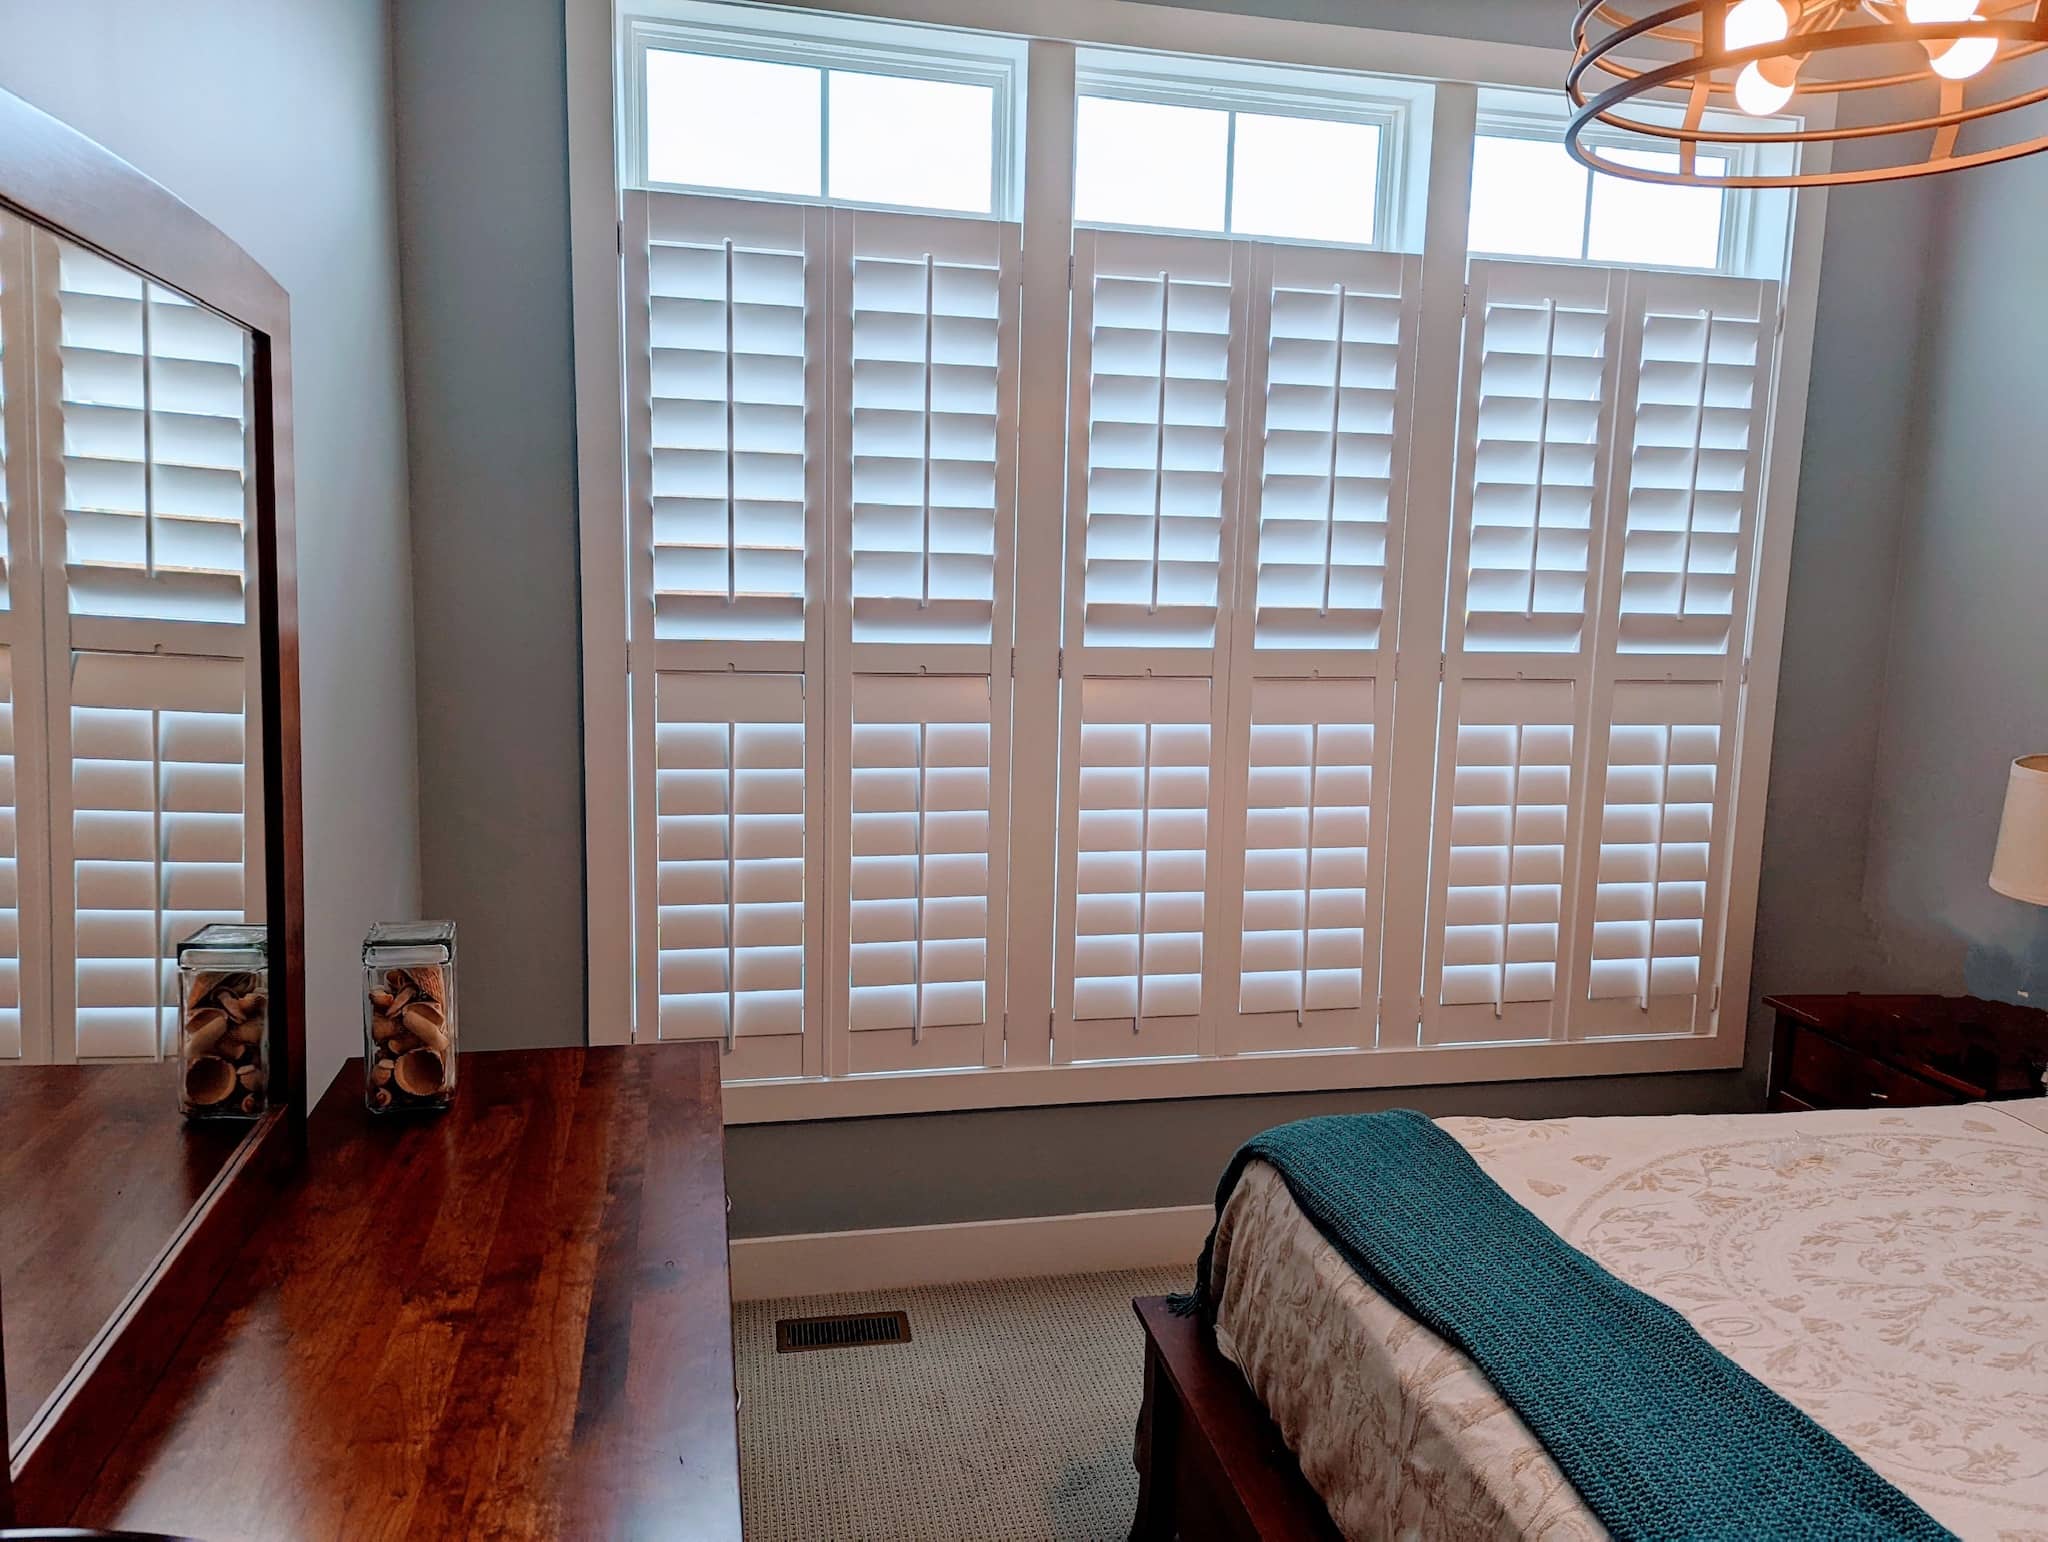 What Are The Best Energy-Efficient Window Treatment Ideas?